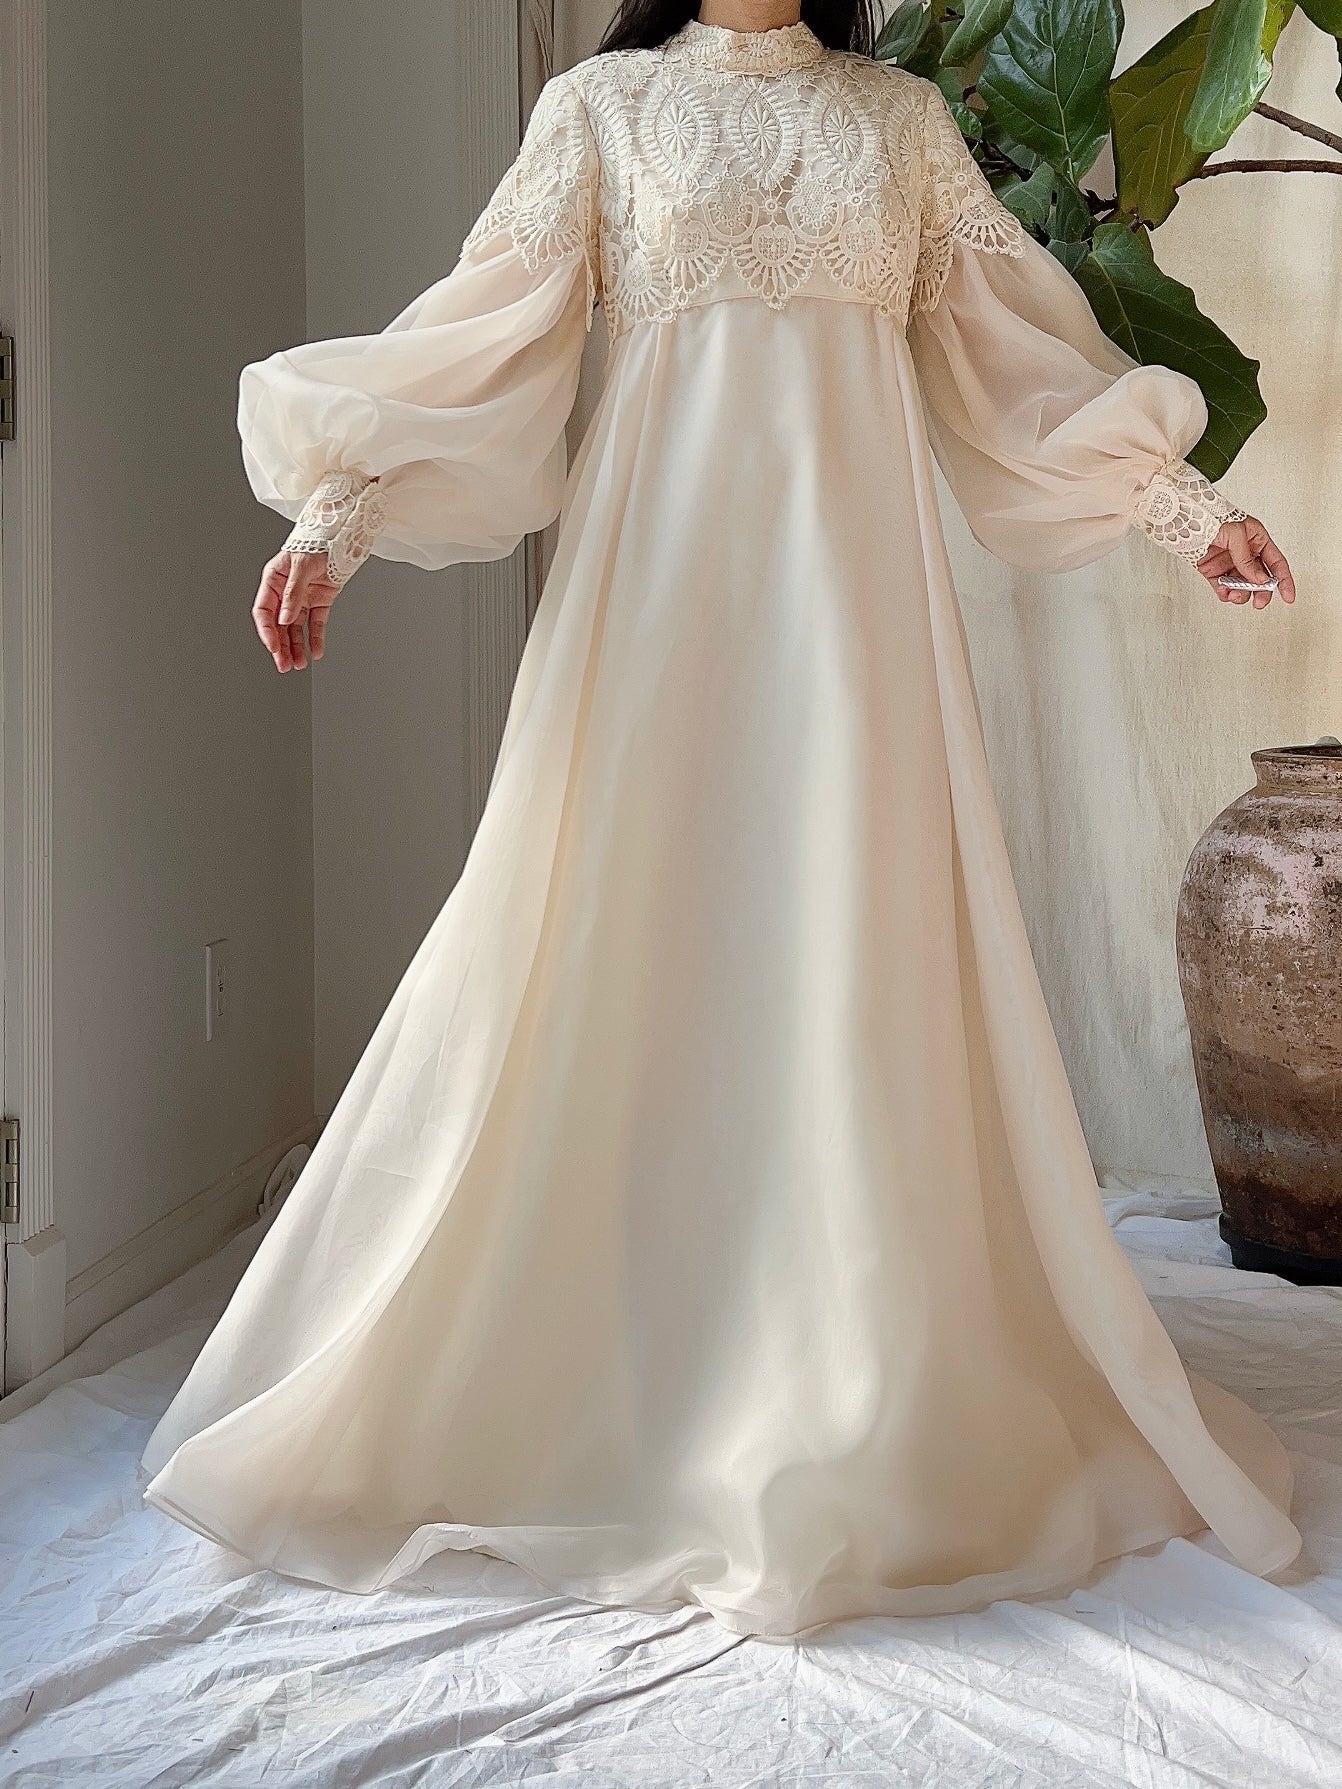 Vintage Puff Sleeves High Neck Gown - M